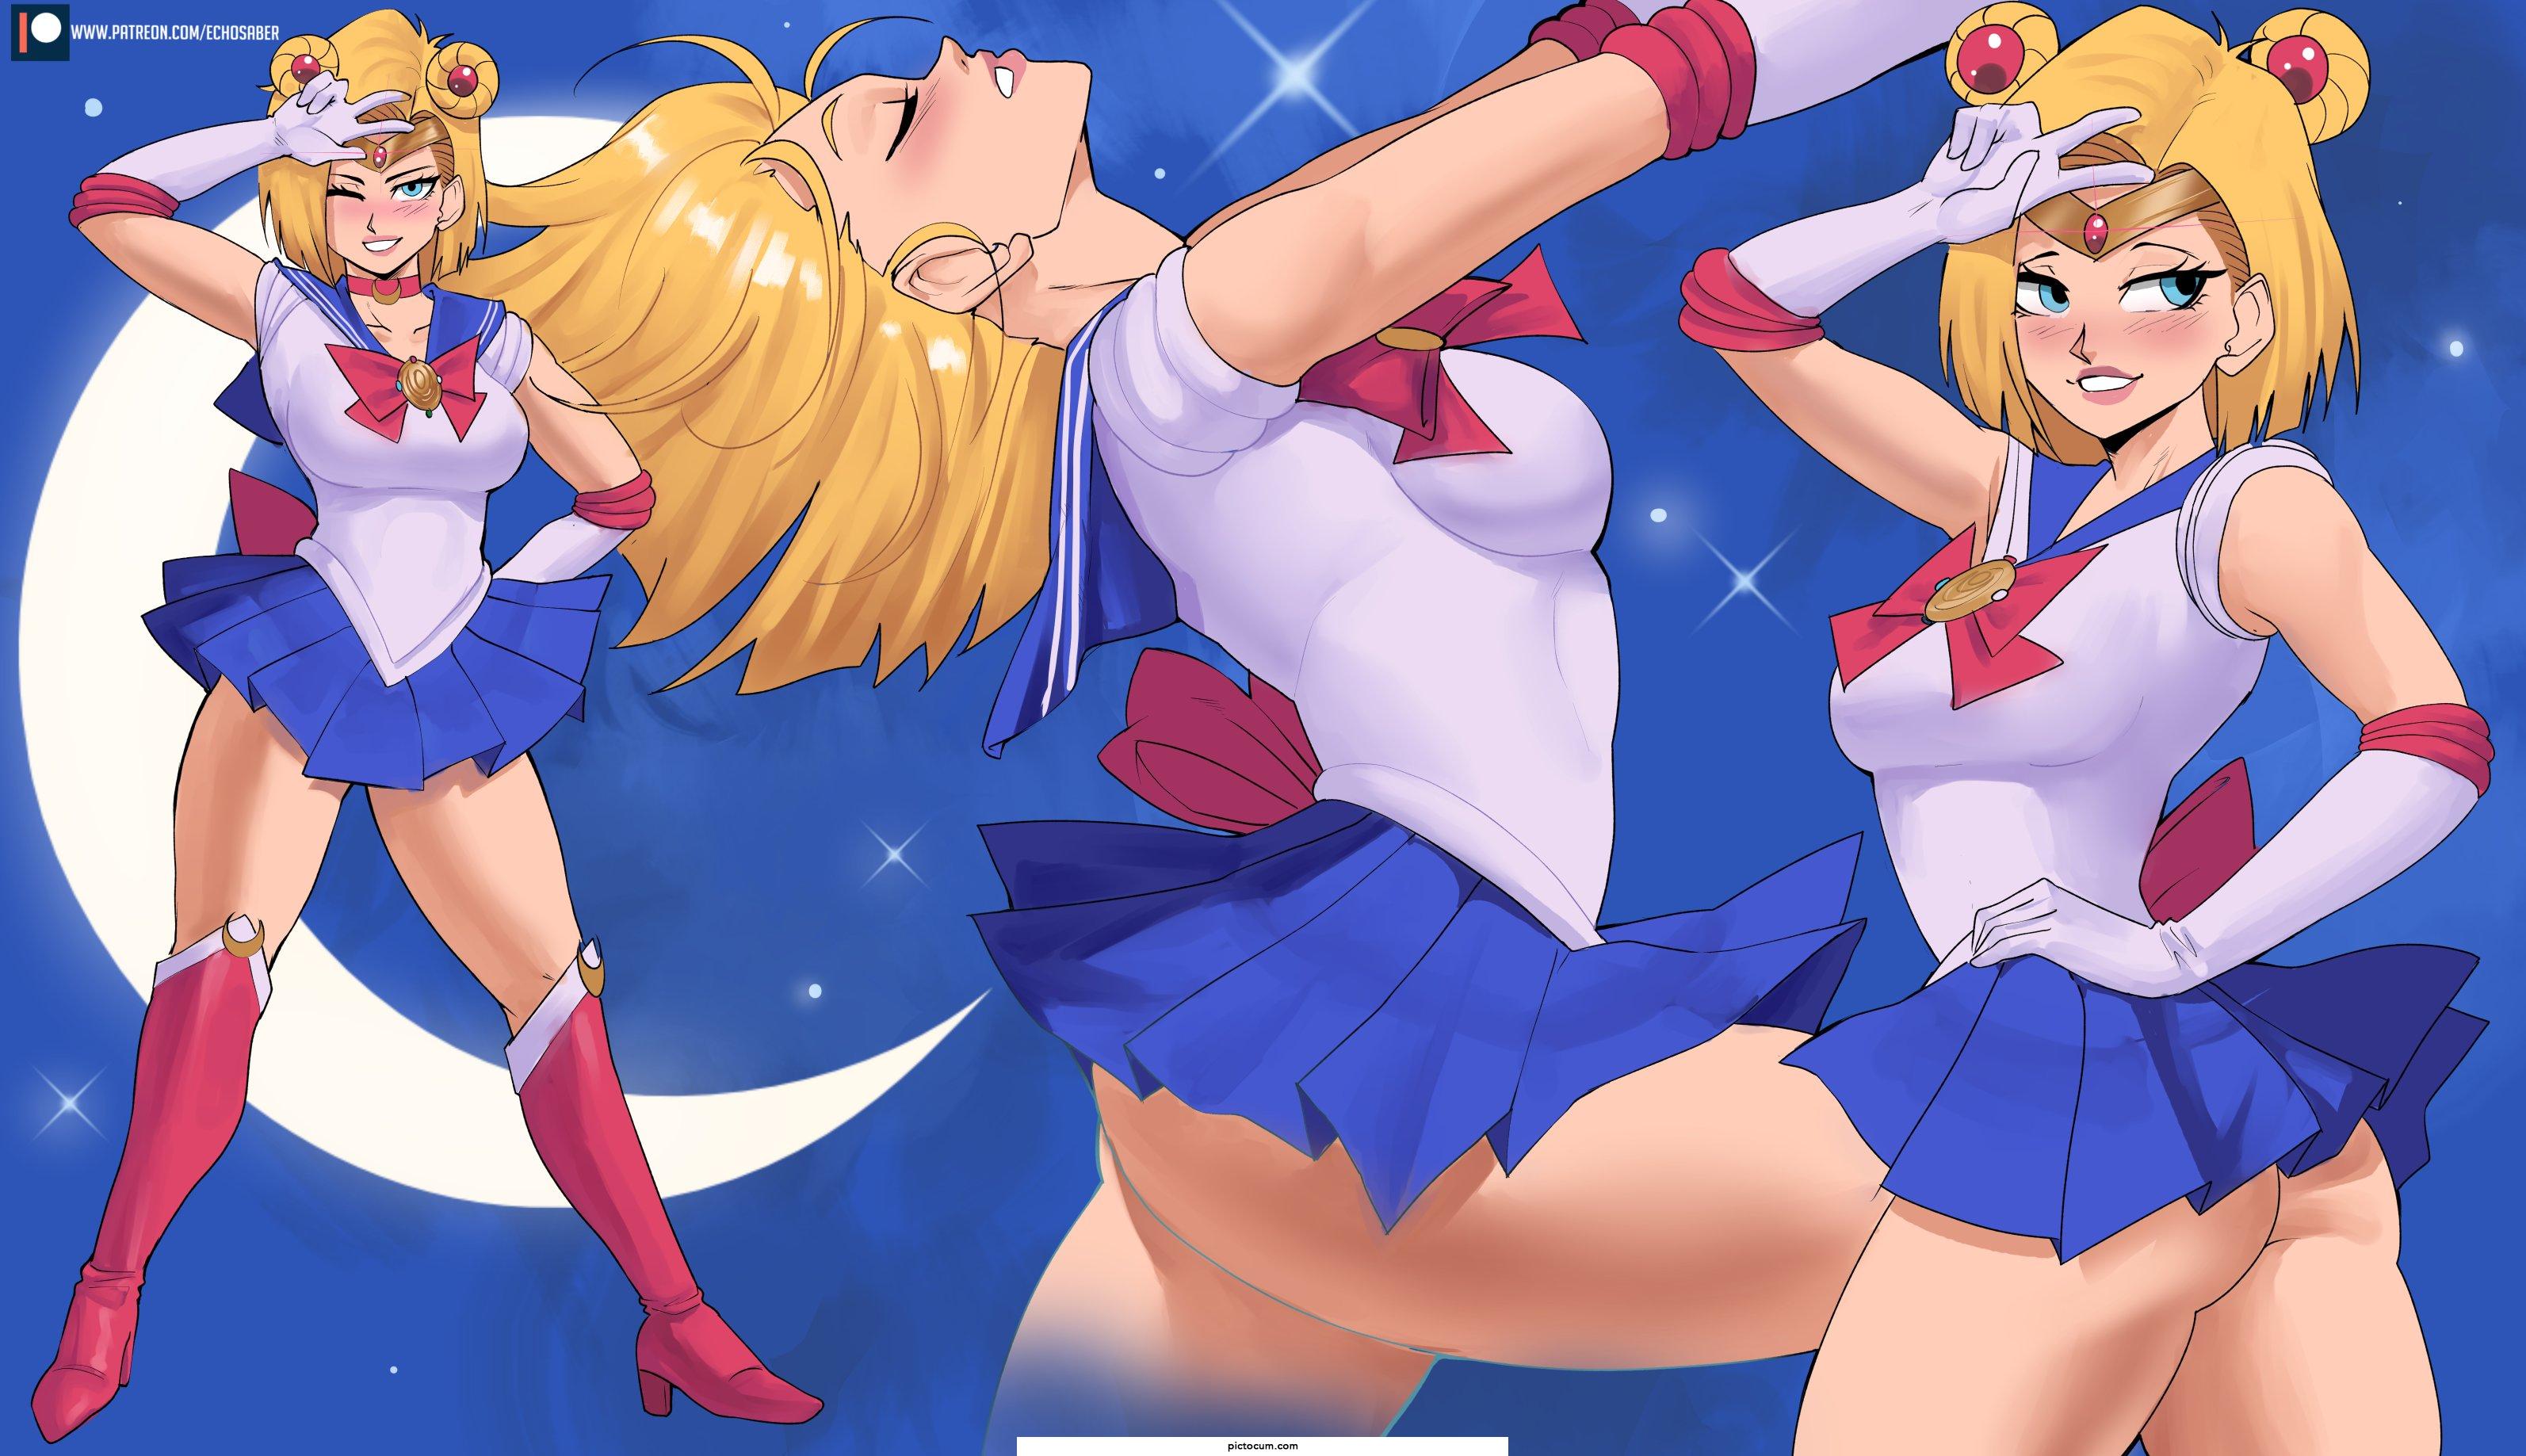 Android 18 cosplaying as Sailor Moon